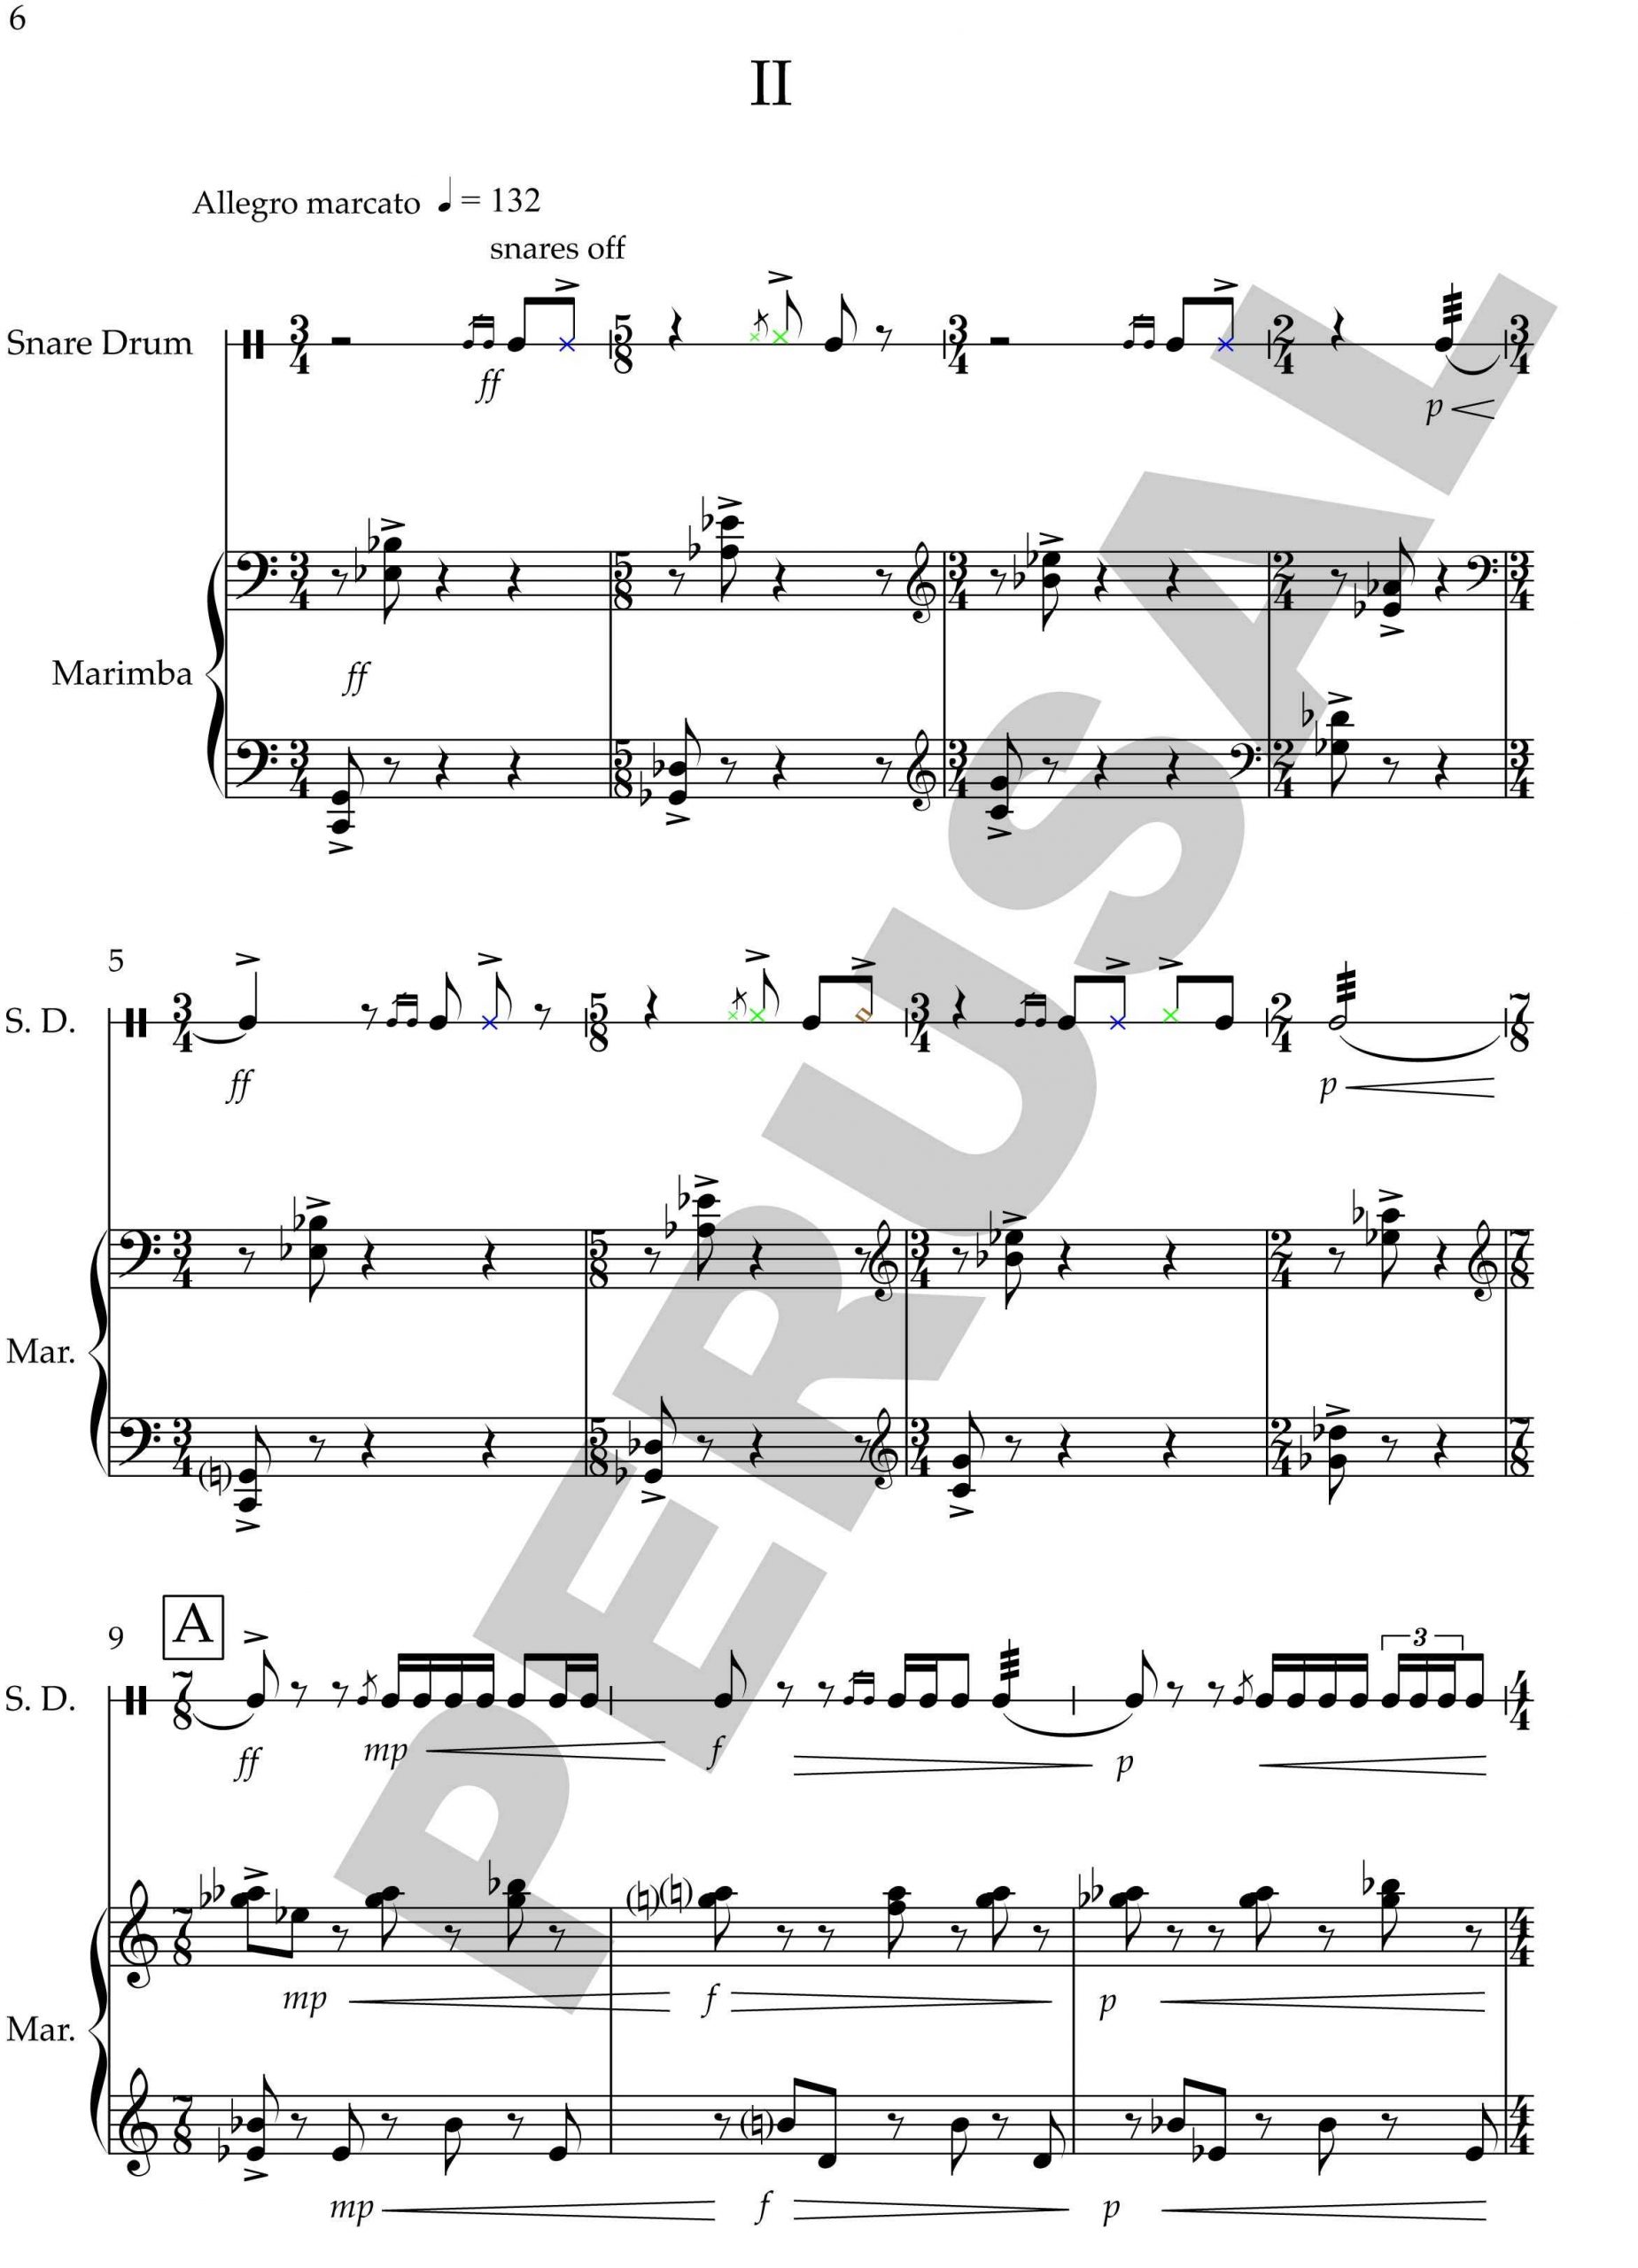 Suite Concertante for Snare Drum and Marimba by David Hext